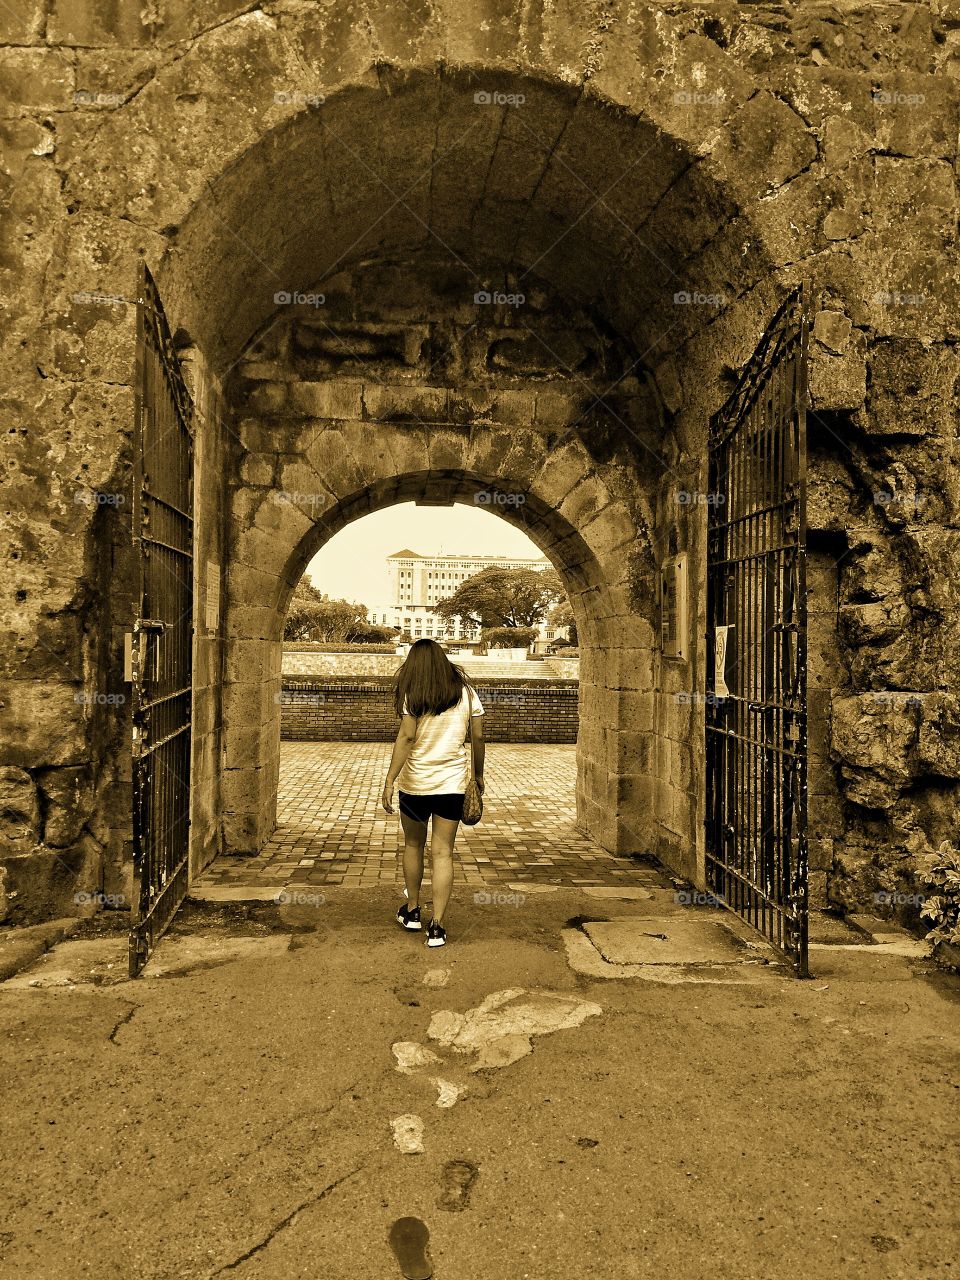 Fort Santiago is a citadel 1st built by Spanish navigator & governor Miguel López de Legazpi for the new established city of Manila in the PH. The defense fortress is part of the structures of the walled city of Manila referred to as Intramuros.